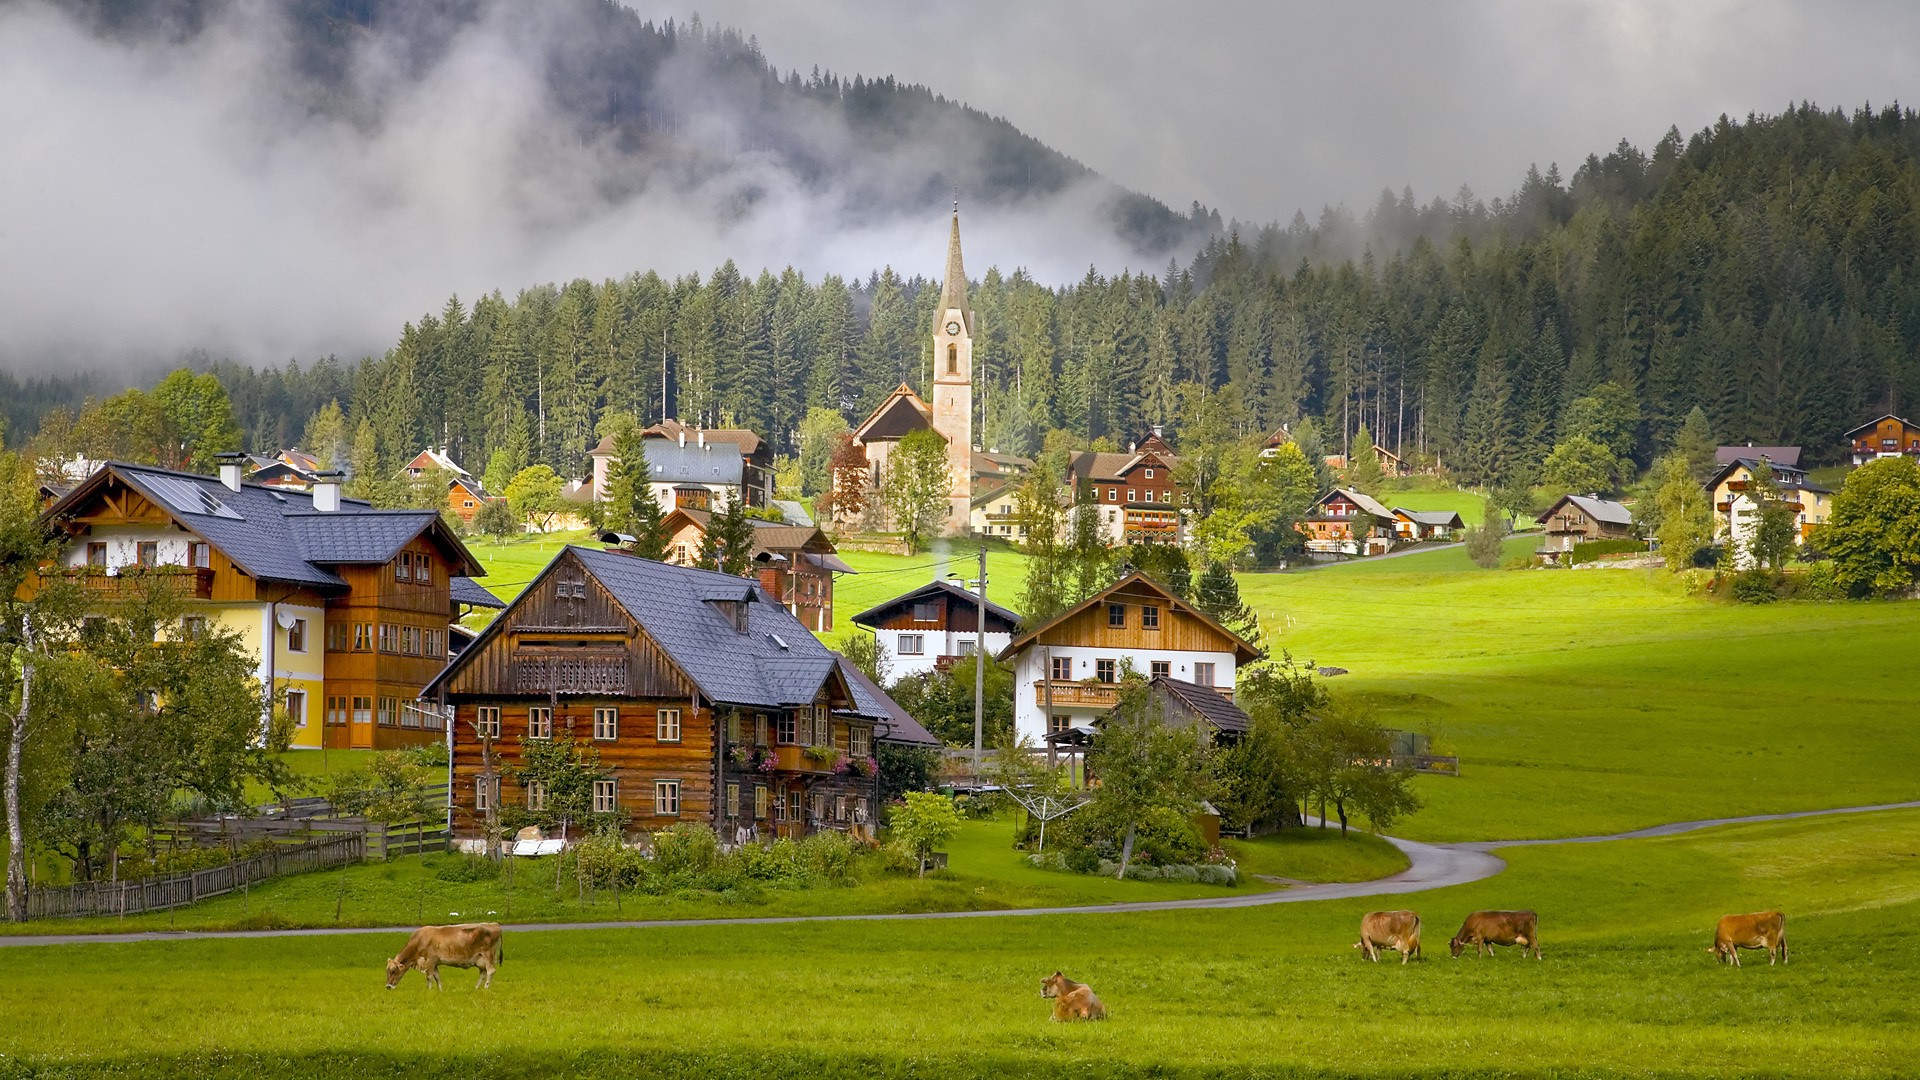 architecture, Town, Building, Austria, Wood, House, Church, Villages, Nature, Trees, Forest, Mist, Road, Animals, Cows, Grass Wallpaper